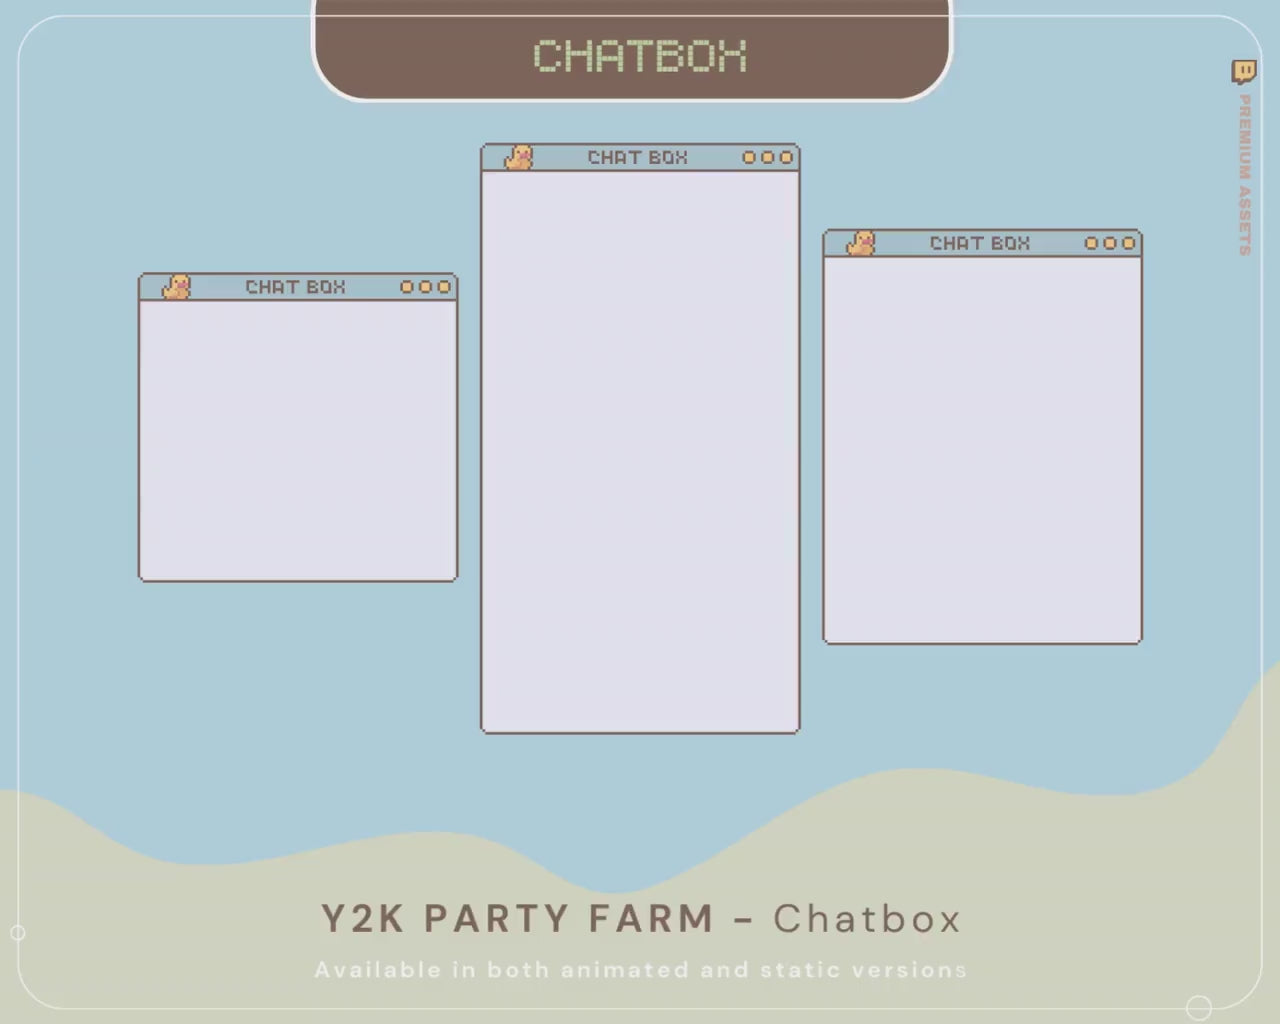 Twitch Chatbox Overlay Animation Farming Game Pixel Aesthetic Cute Duck Cat Animated Chat Stream Overlay Streamer Vtubber Kick Youtube Live